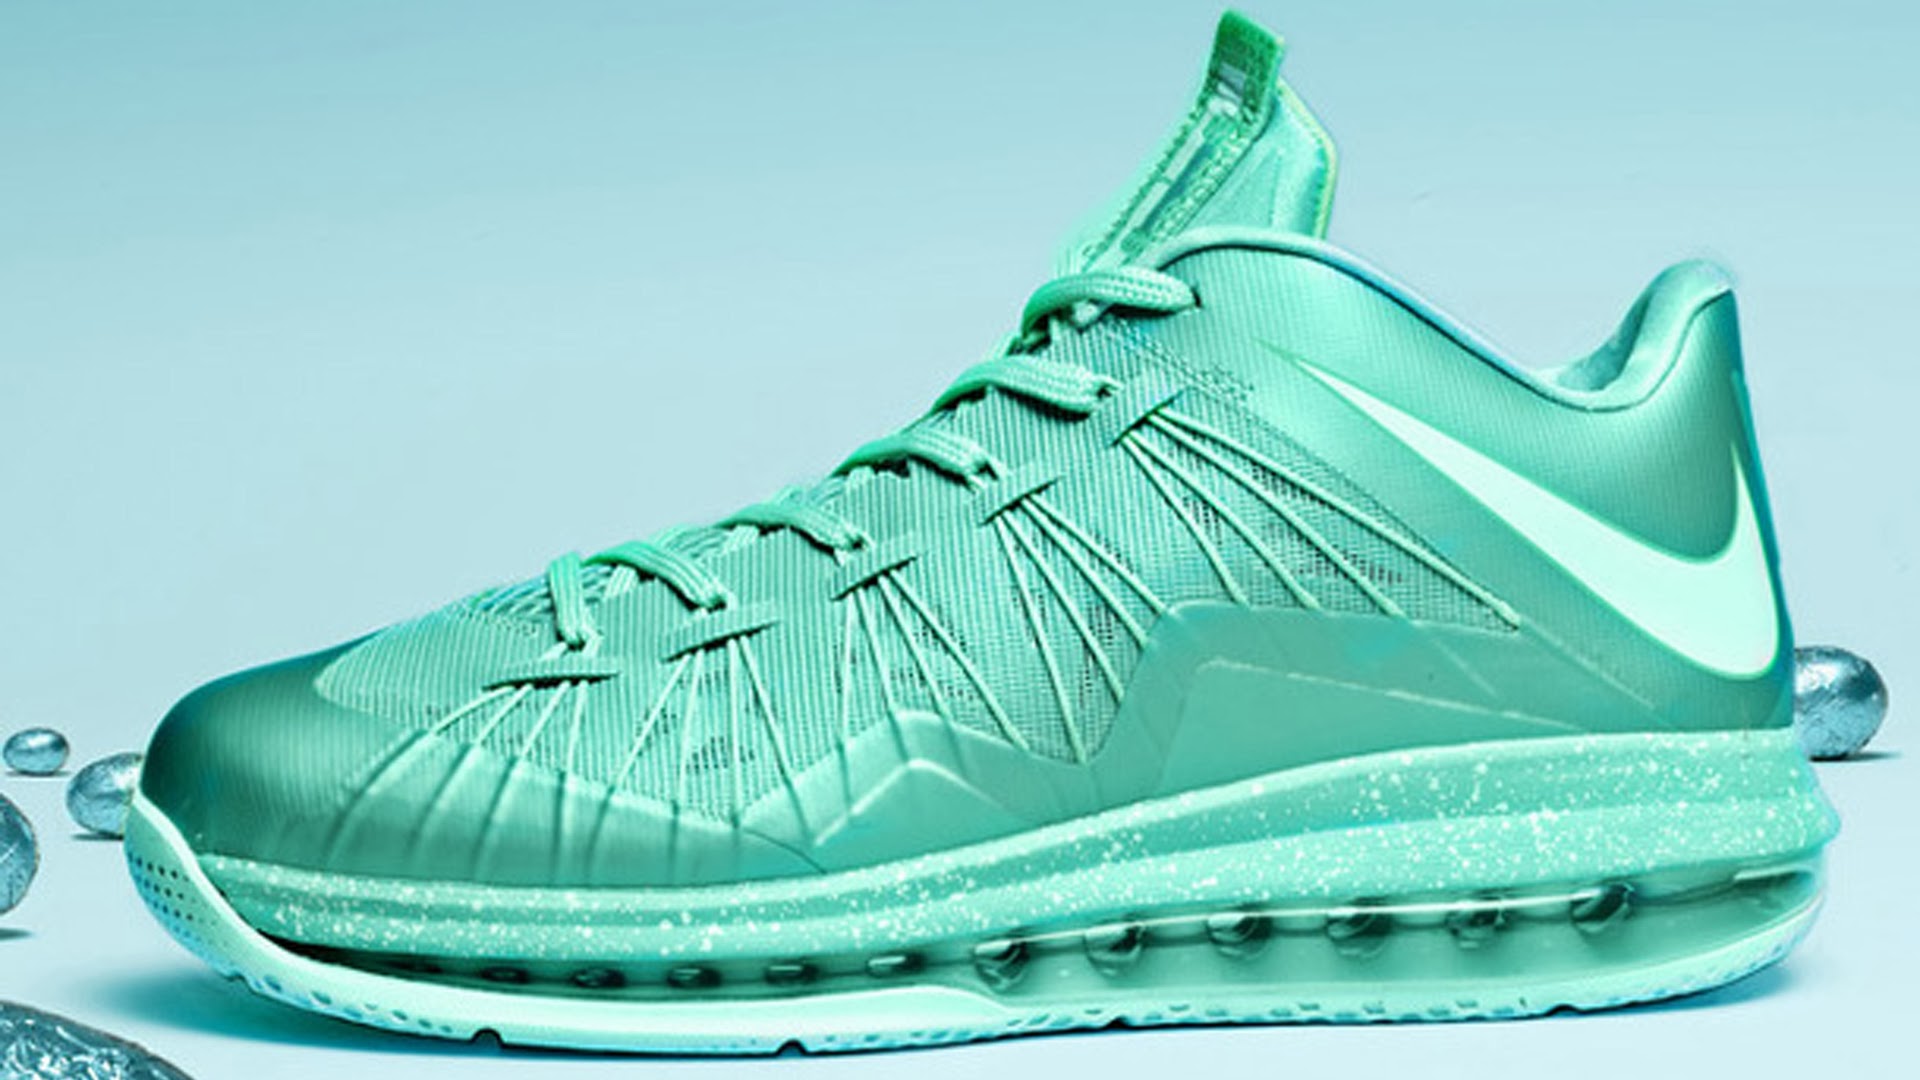 Nike Lebron Low Easter Shoes Wallpaper Hiresmoall